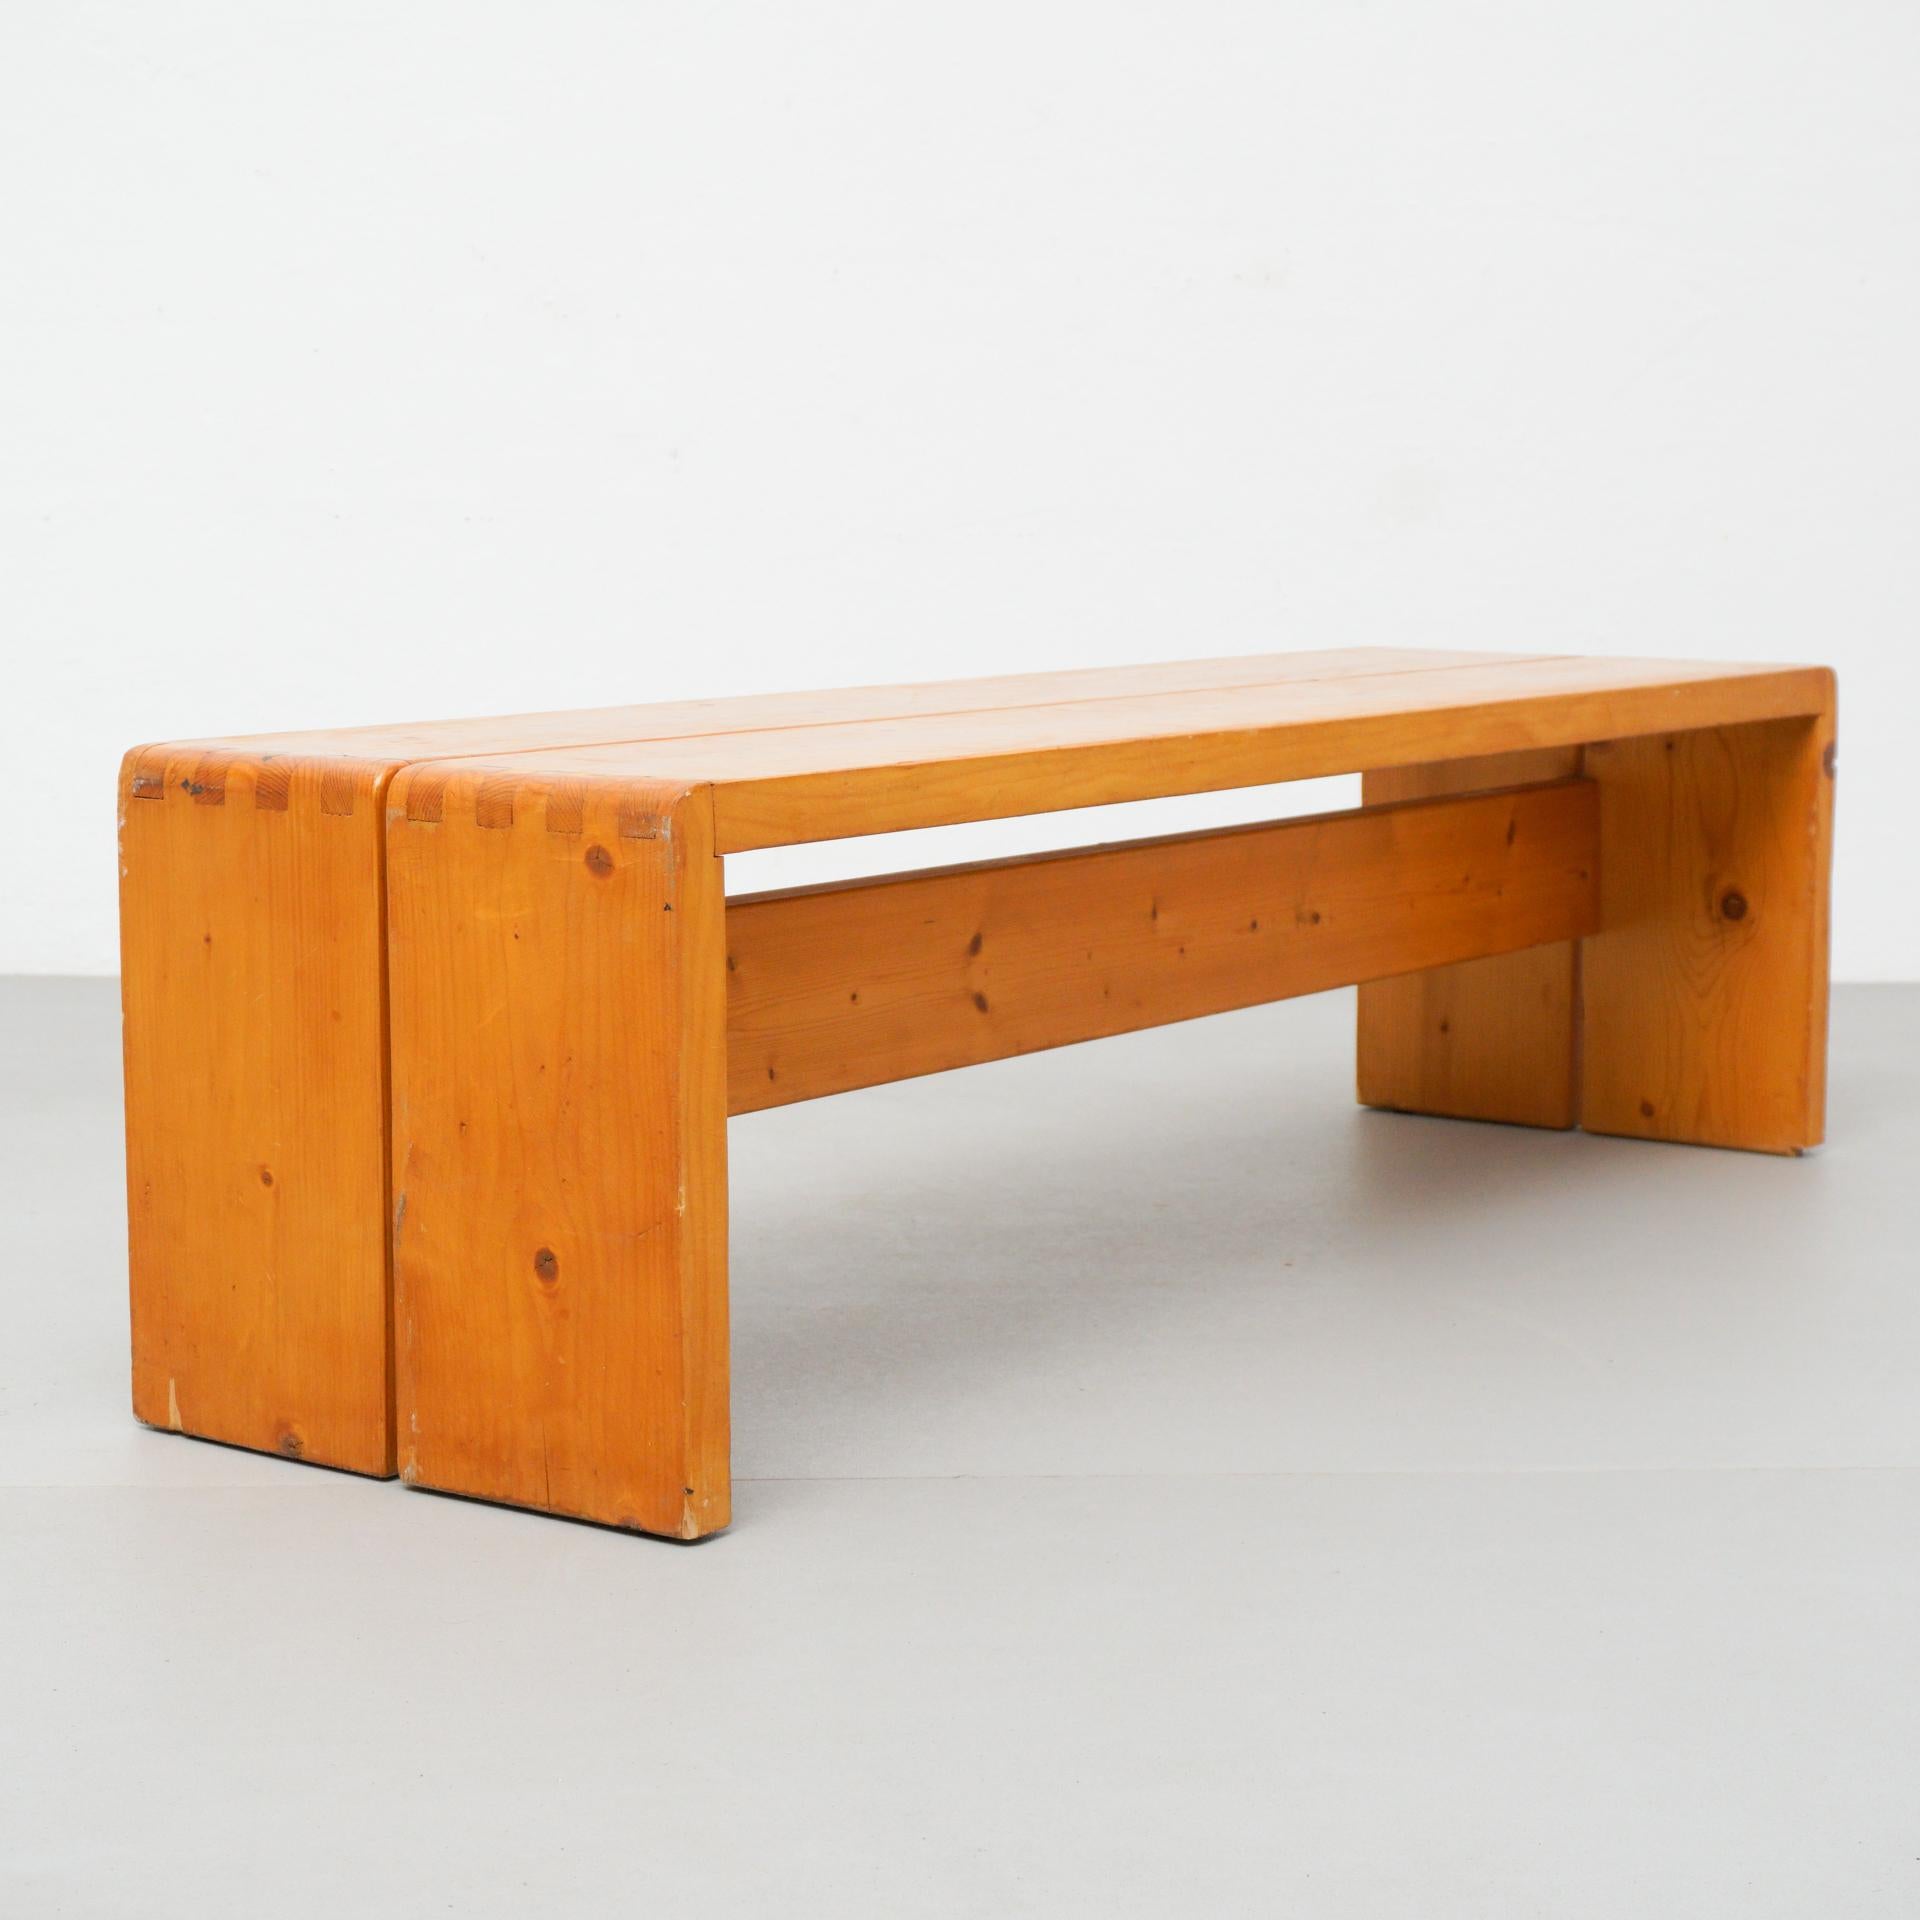 Bench designed by Charlotte Perriand for Les Arcs ski resort, circa 1960, manufactured in France.
Pinewood.

In original condition, with wear consistent with age and use, preserving a beautiful patina.

Charlotte Perriand (1903-1999) She was